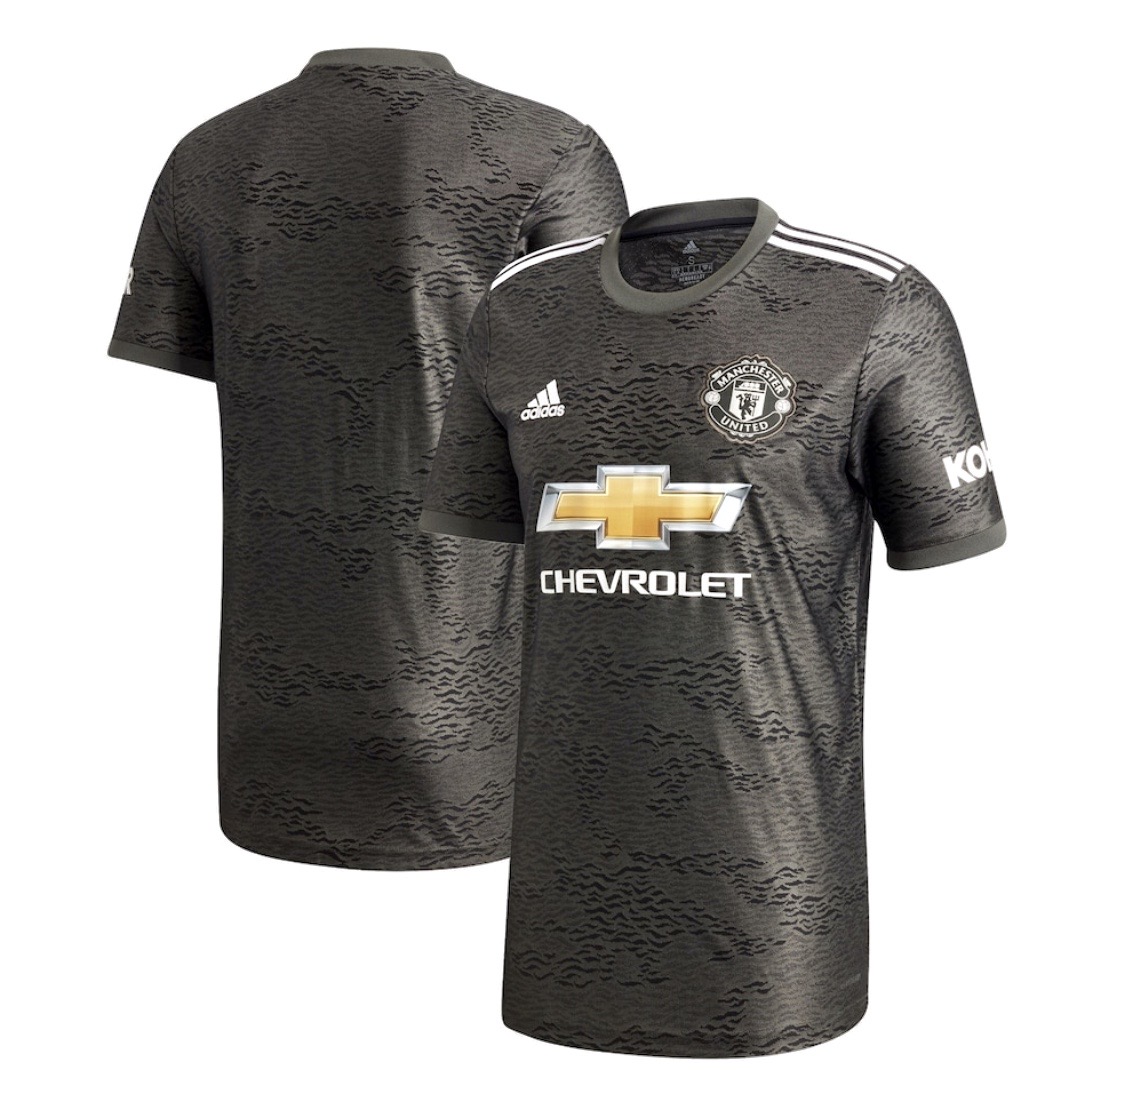 united away jersey